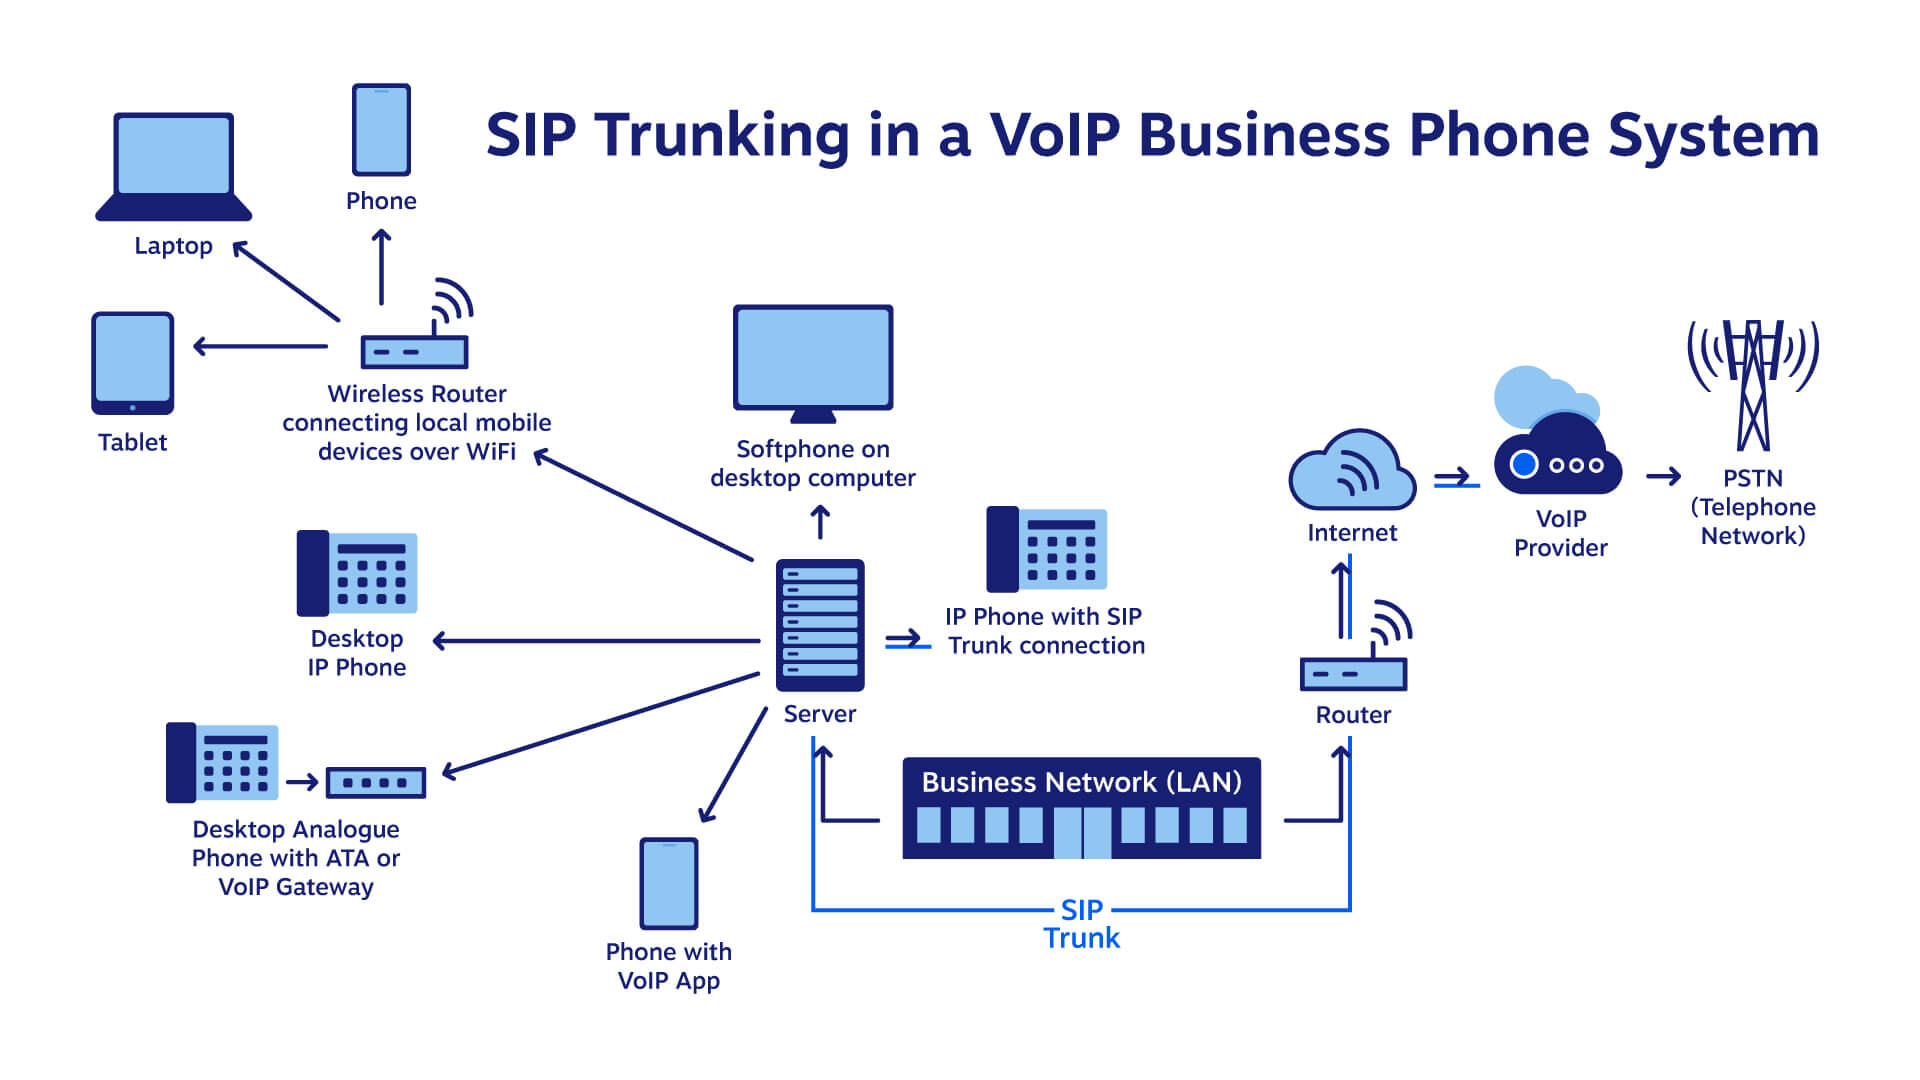 Diagram showing how SIP trunking works